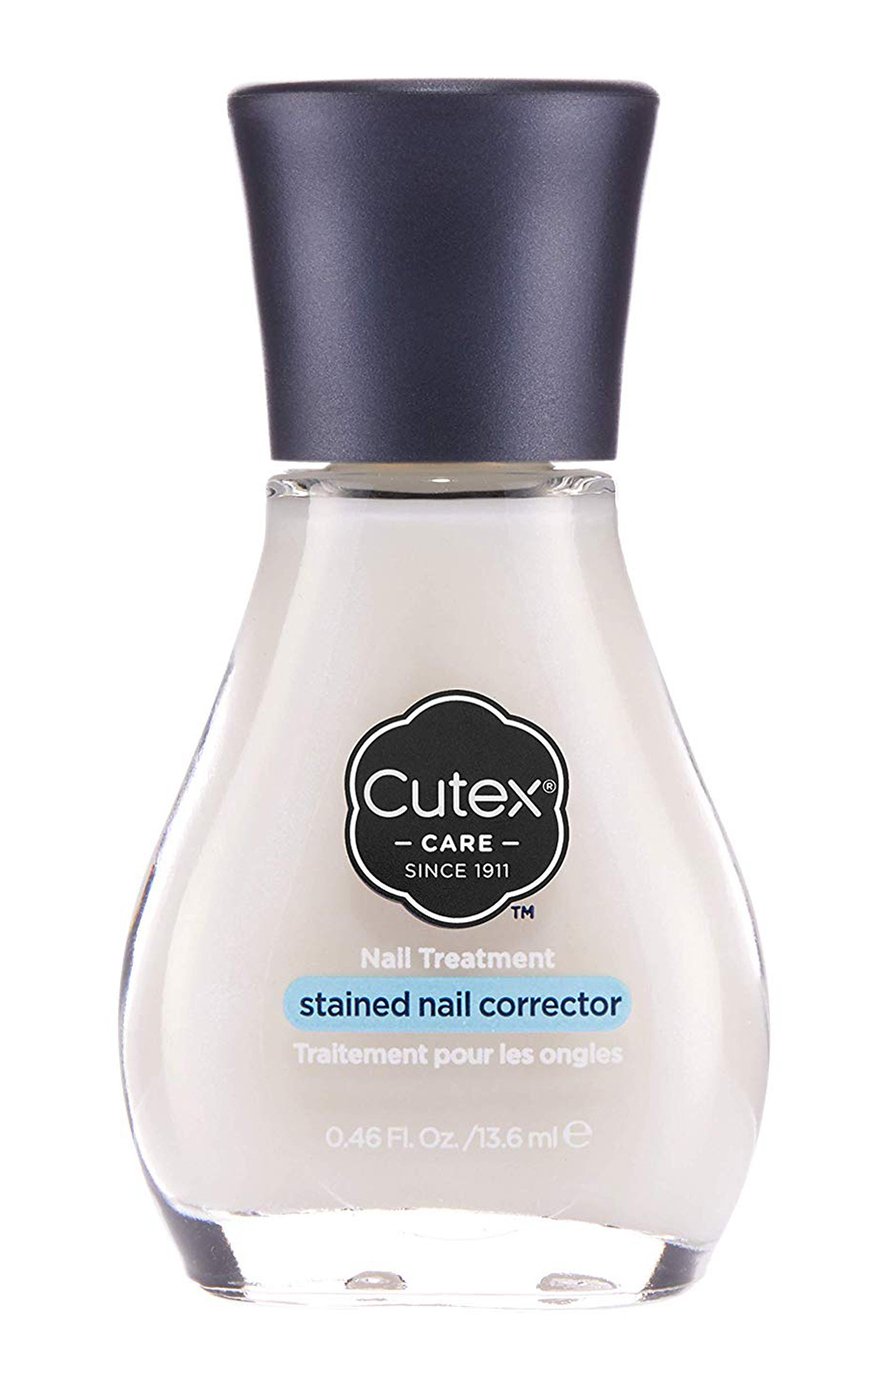 Cutex Stained Nail Corrector